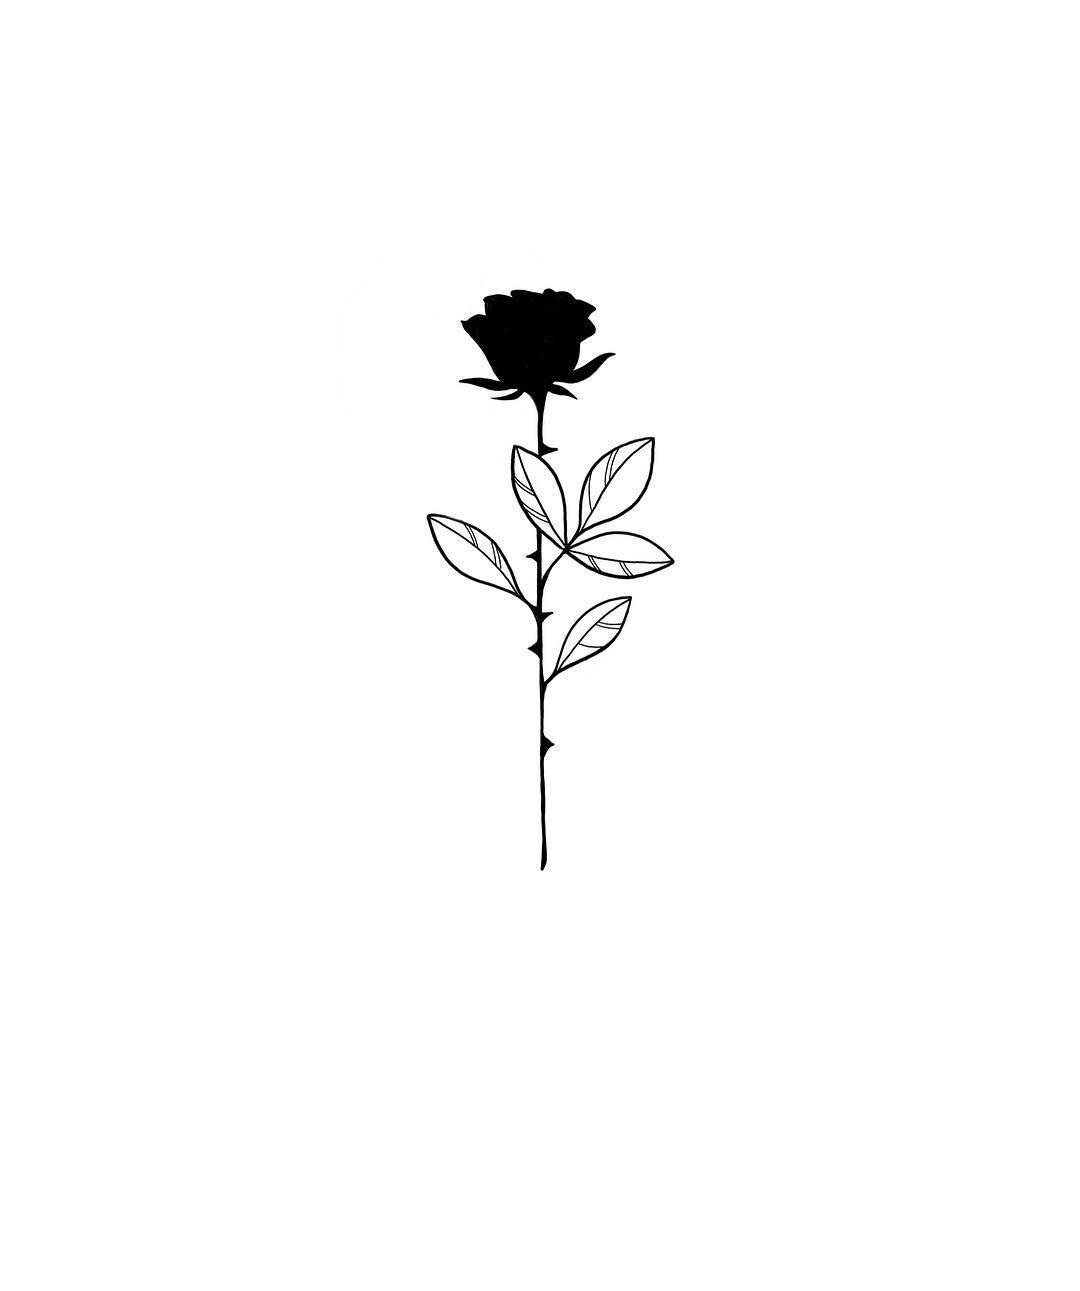 Rose Black And White Clipart Images For Free Download  Pngtree